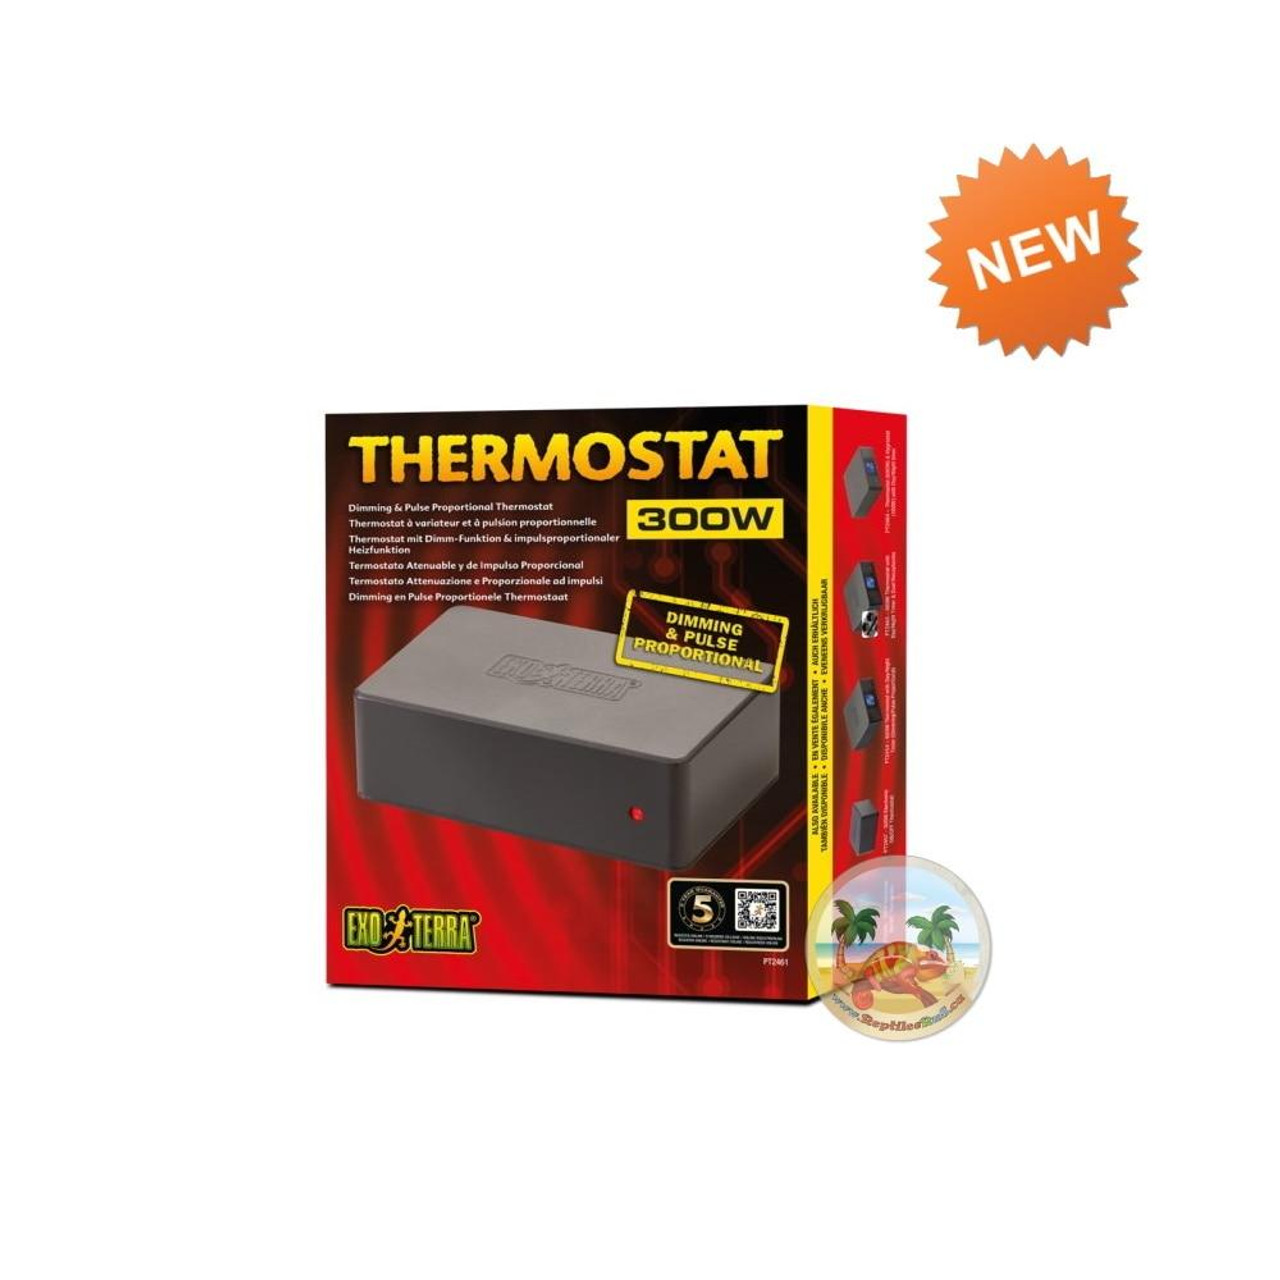 Exo Terra Exo Terra Thermostat 300W Dimming and Pulse Proportional Thermostat